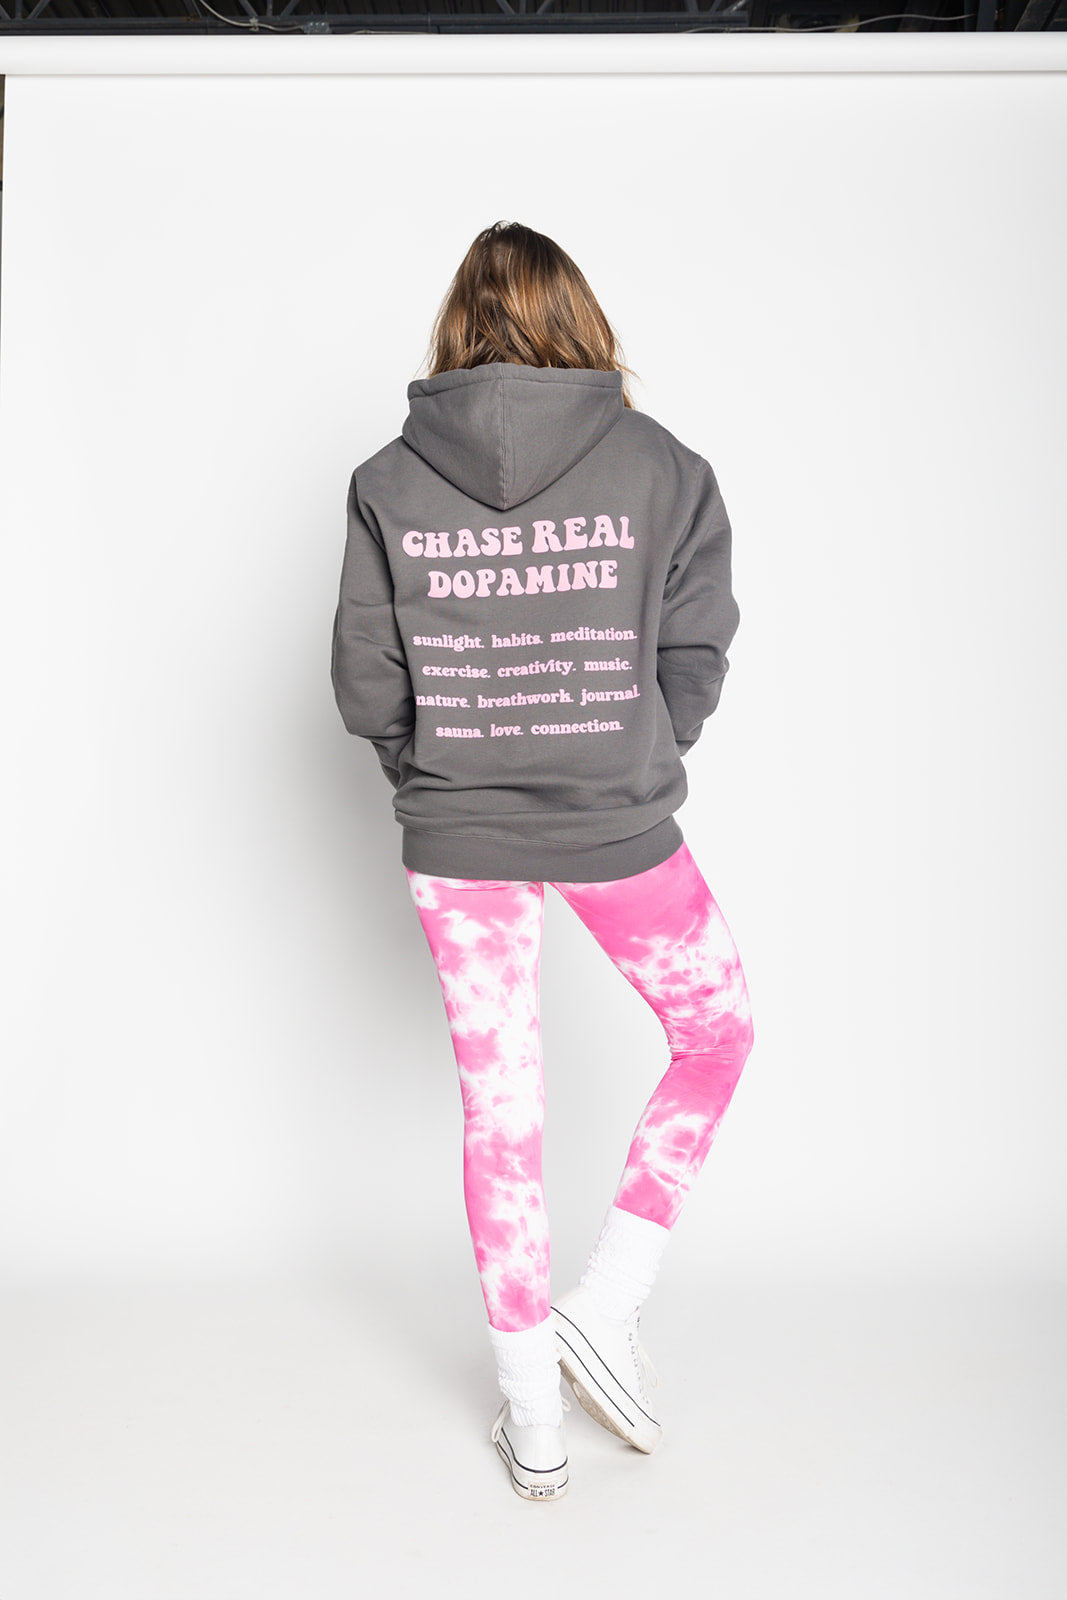 Chase Real Dopamine Hoodie - [S-3X]